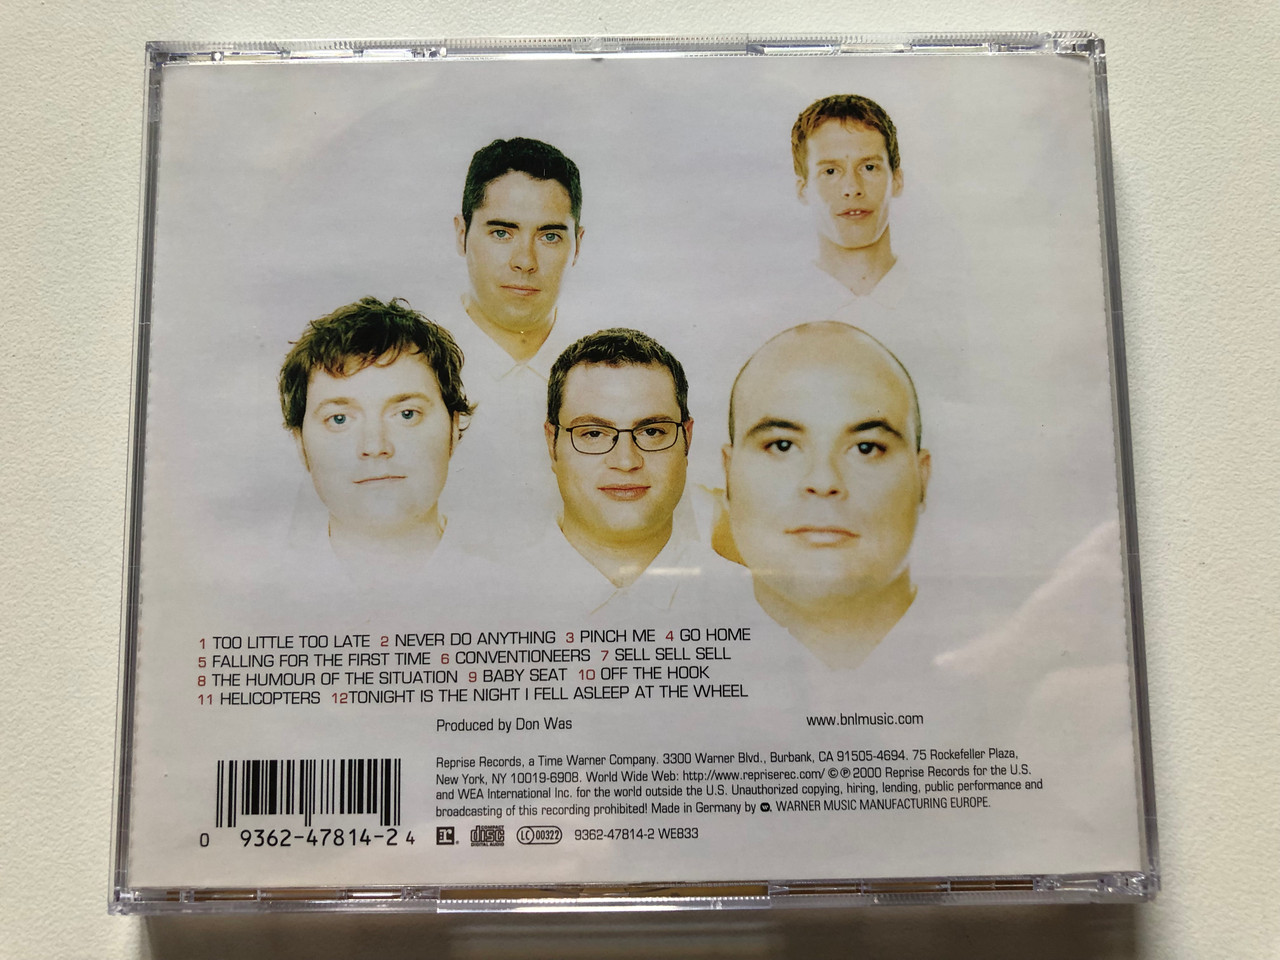 https://cdn10.bigcommerce.com/s-62bdpkt7pb/products/0/images/312691/Barenaked_Ladies_Maroon_Reprise_Records_Audio_CD_2000_9362-47814-2_2__74404.1700111490.1280.1280.JPG?c=2